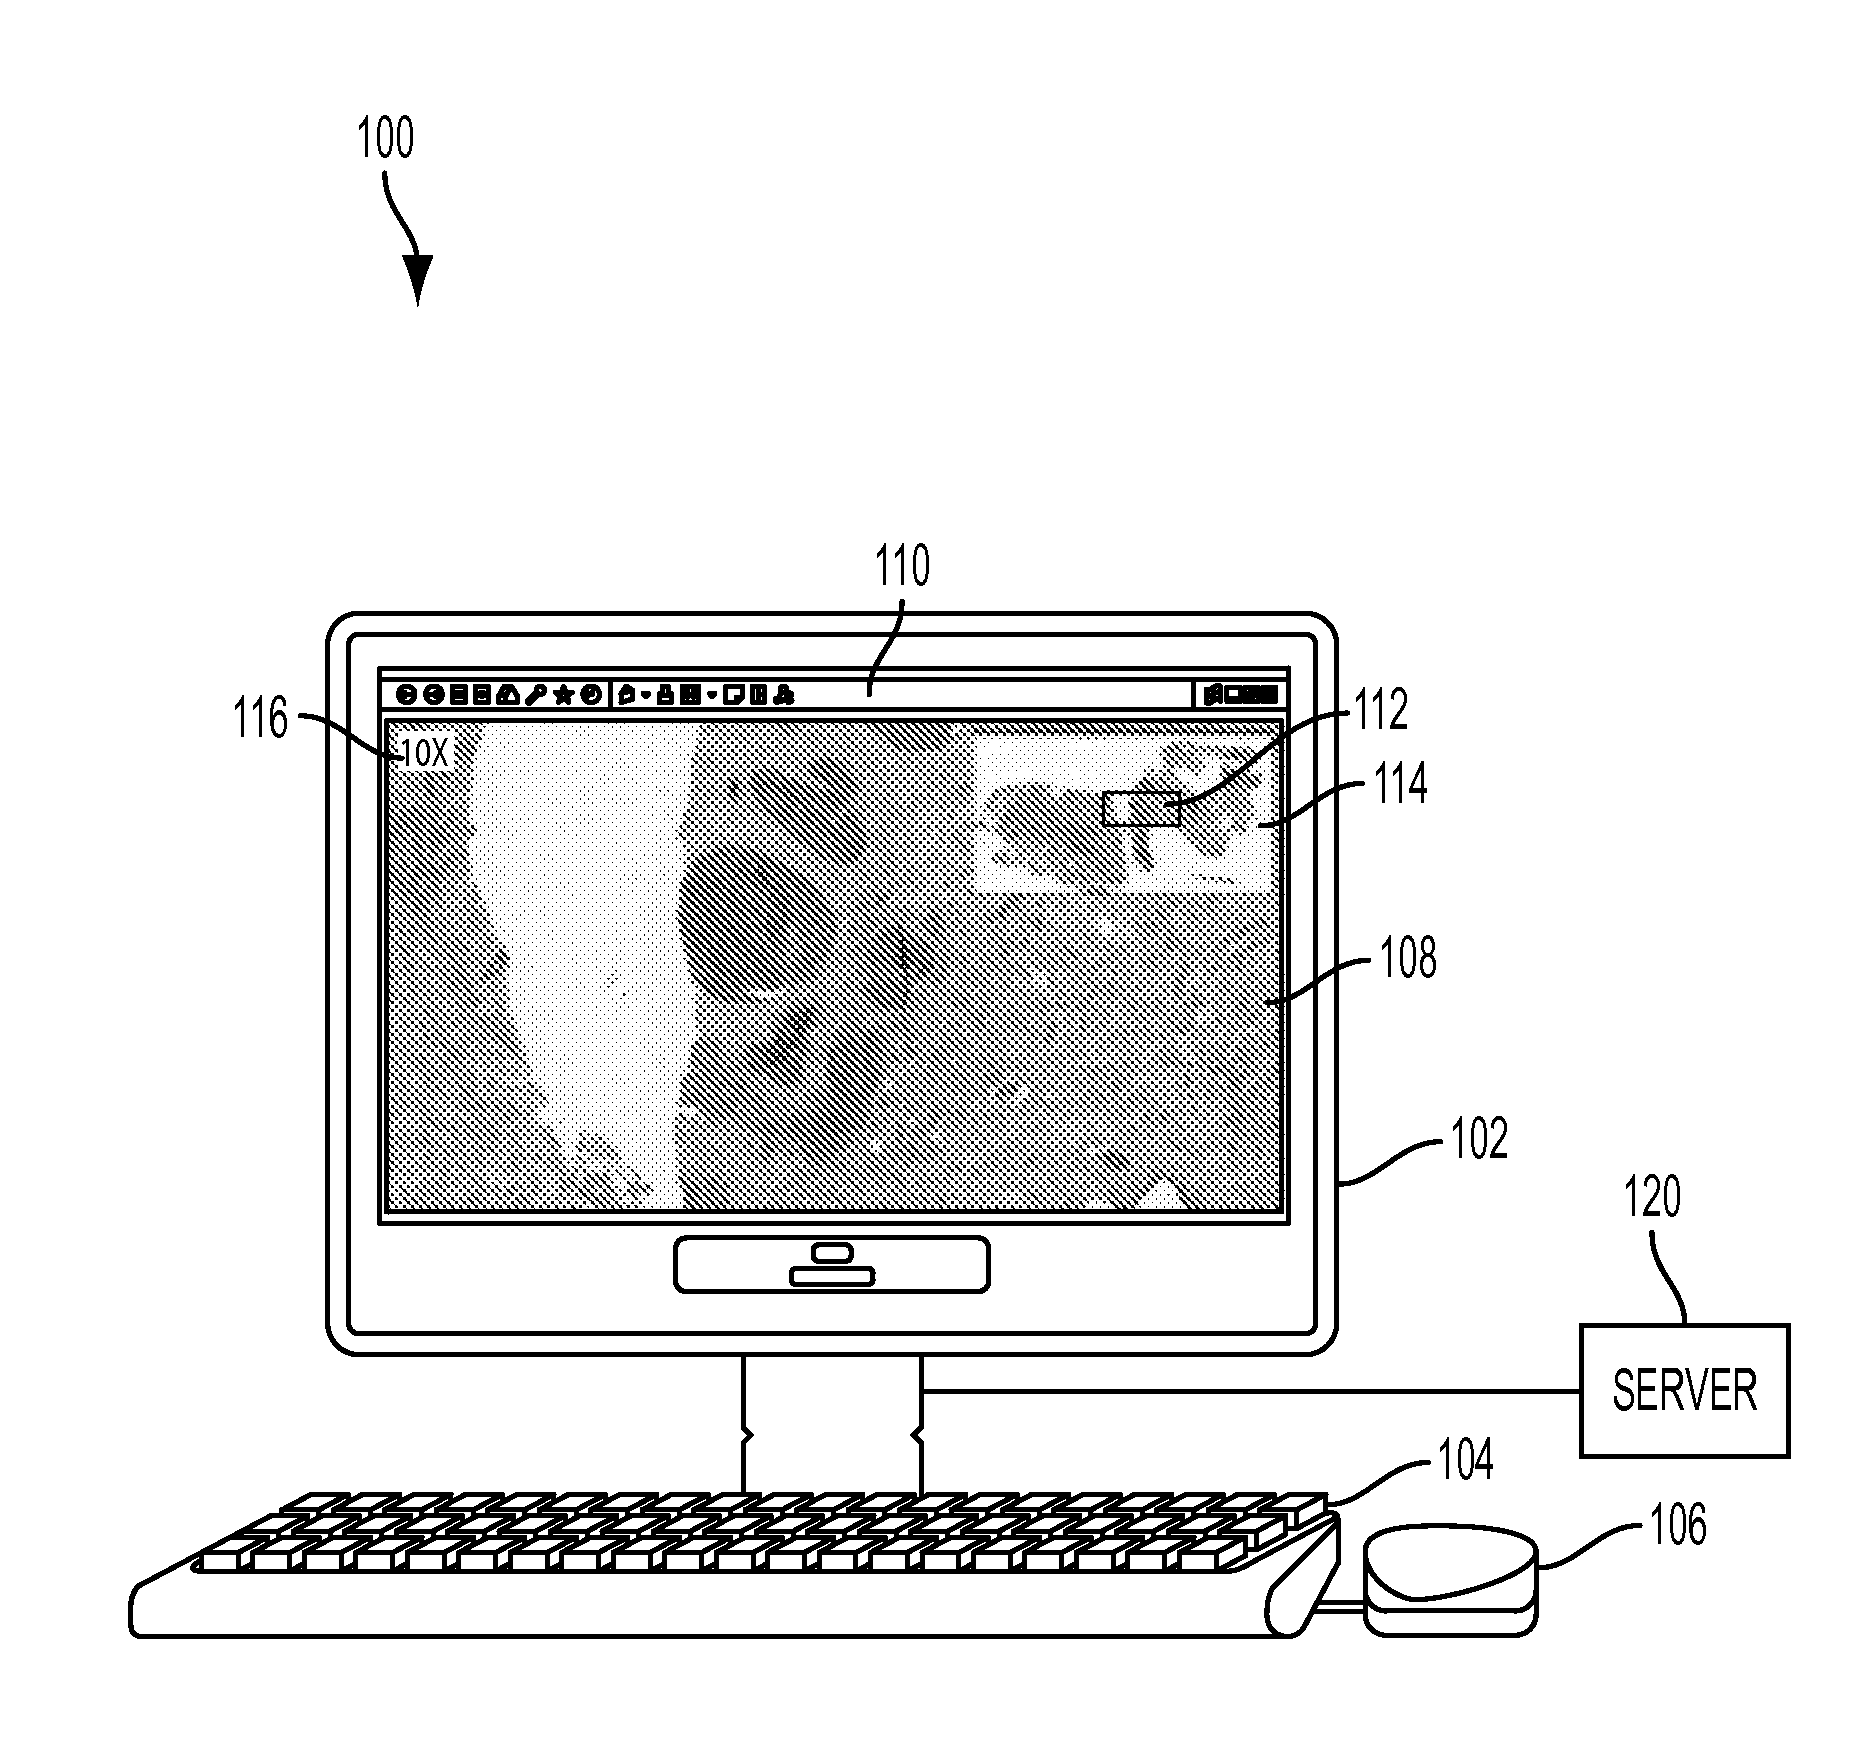 System and method for improved viewing and navigation of digital images